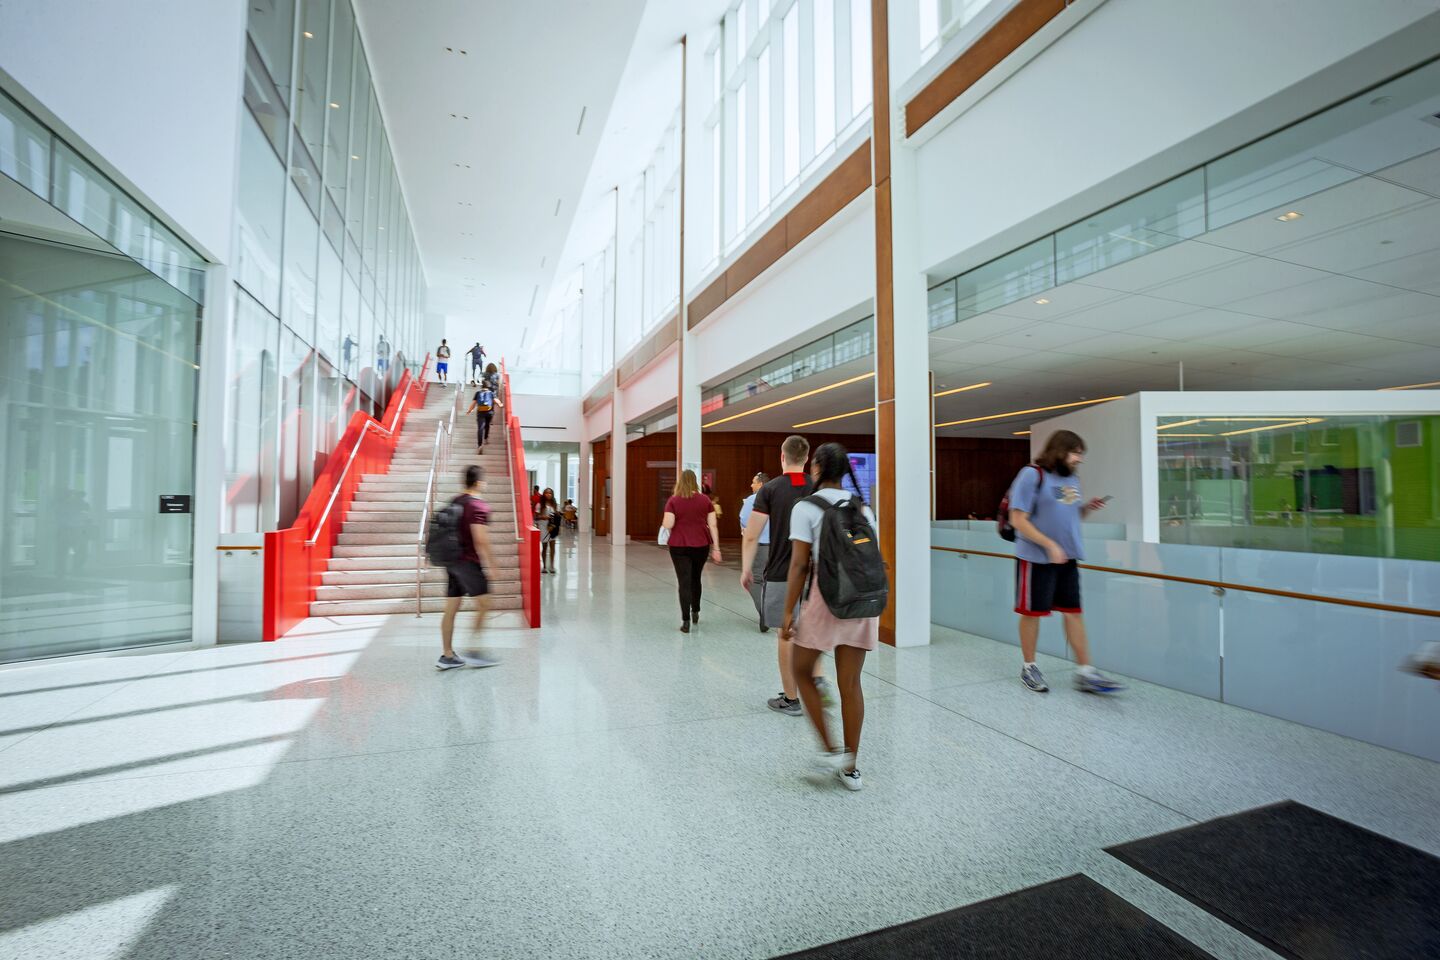 Interior of Edward St. John Learning and Teaching Center with students walking.